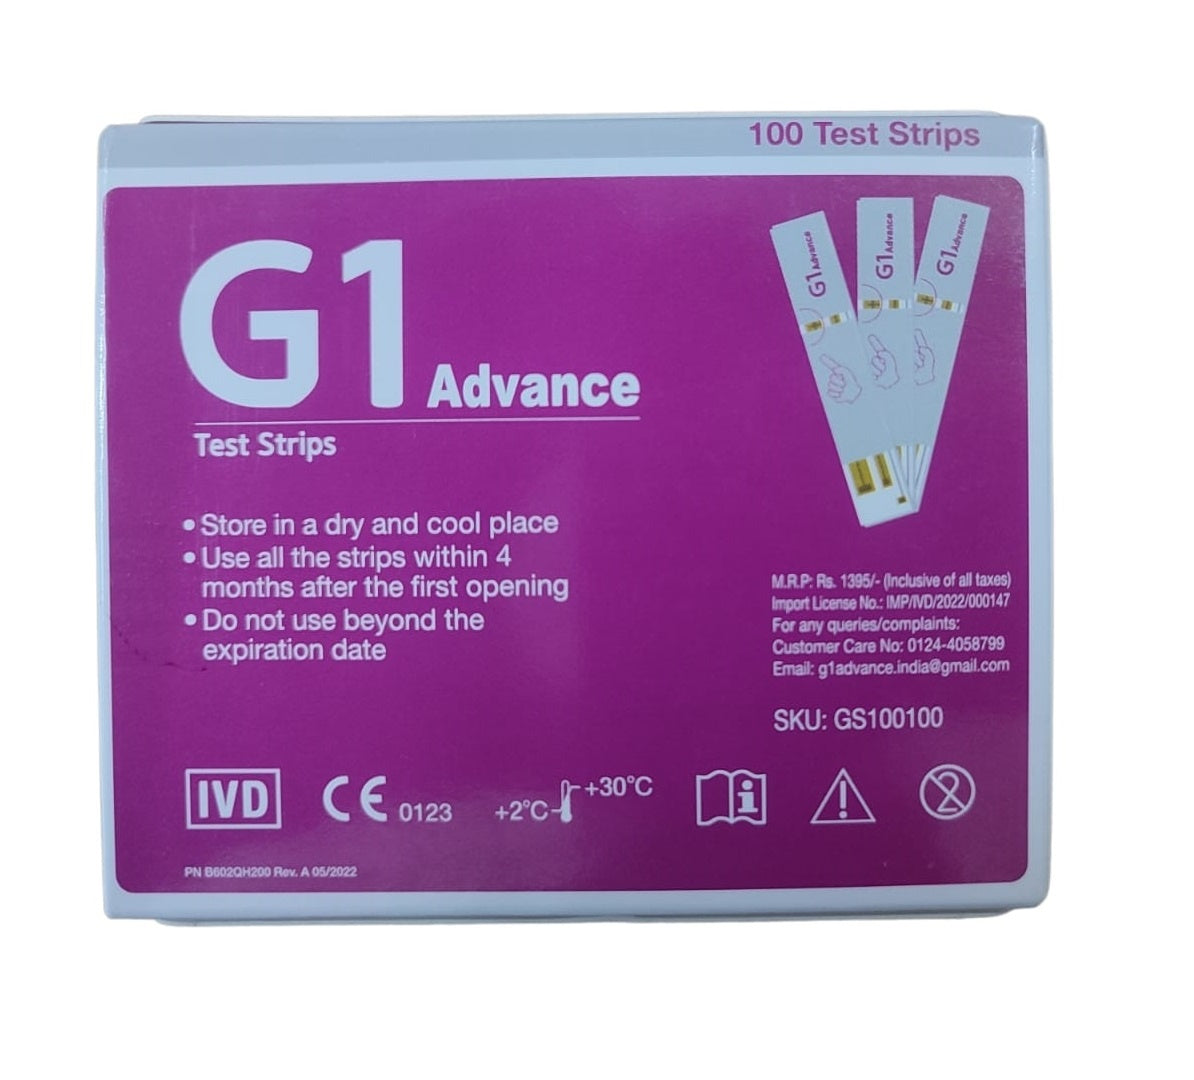 G1 Advanced Glucometer Test Strips 100 Strips Pack (2x50)